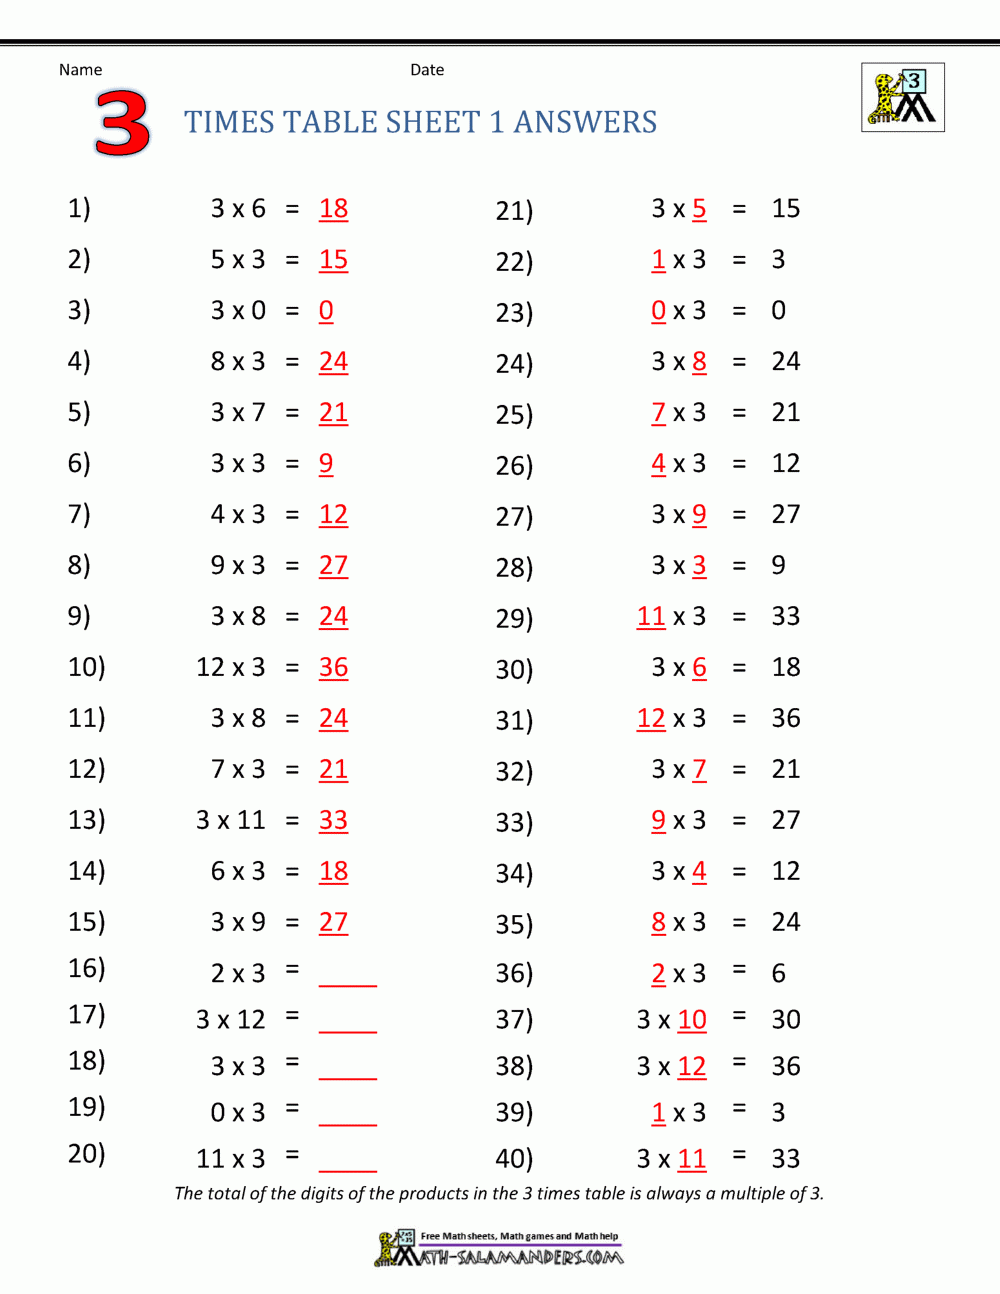 Worksheet ~ Multiplication Fact Sheets Times Table 1Ans